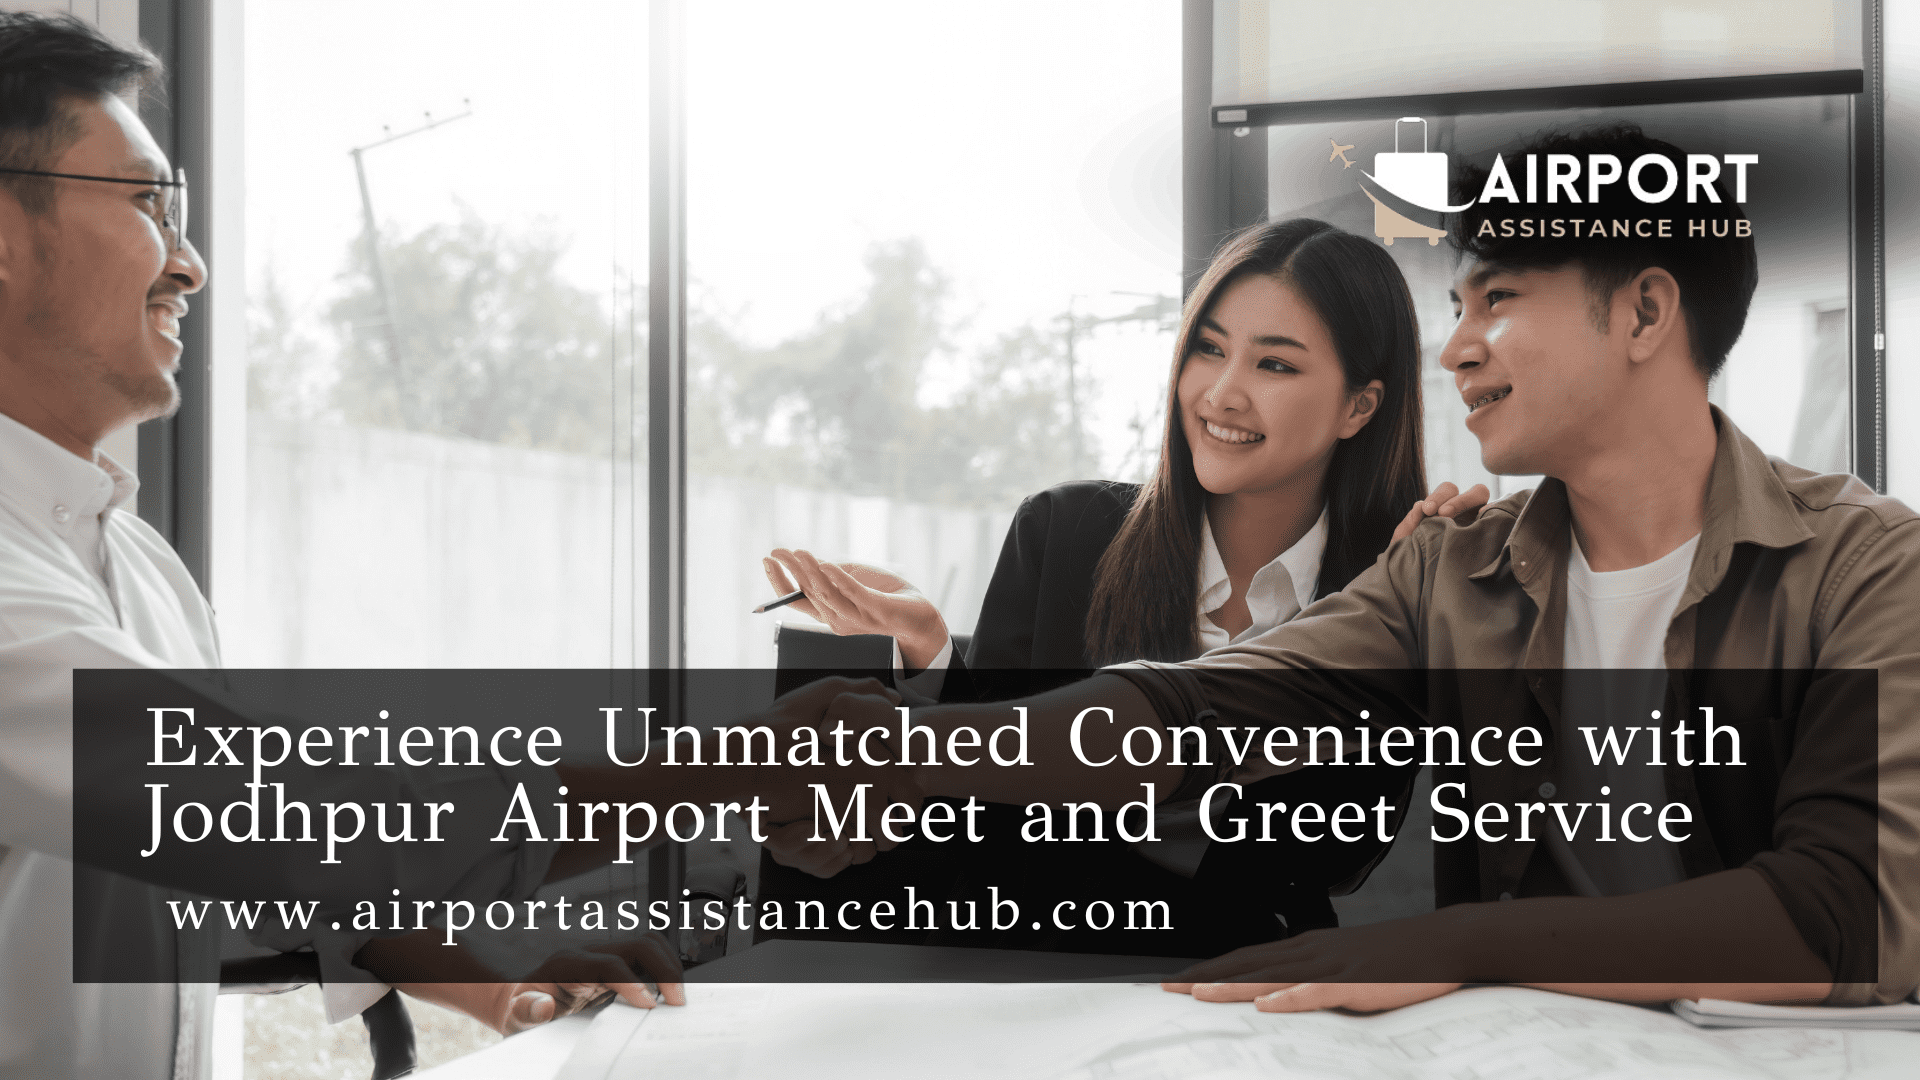 Experience Unmatched Convenience with Jodhpur Airport Meet and Greet Service